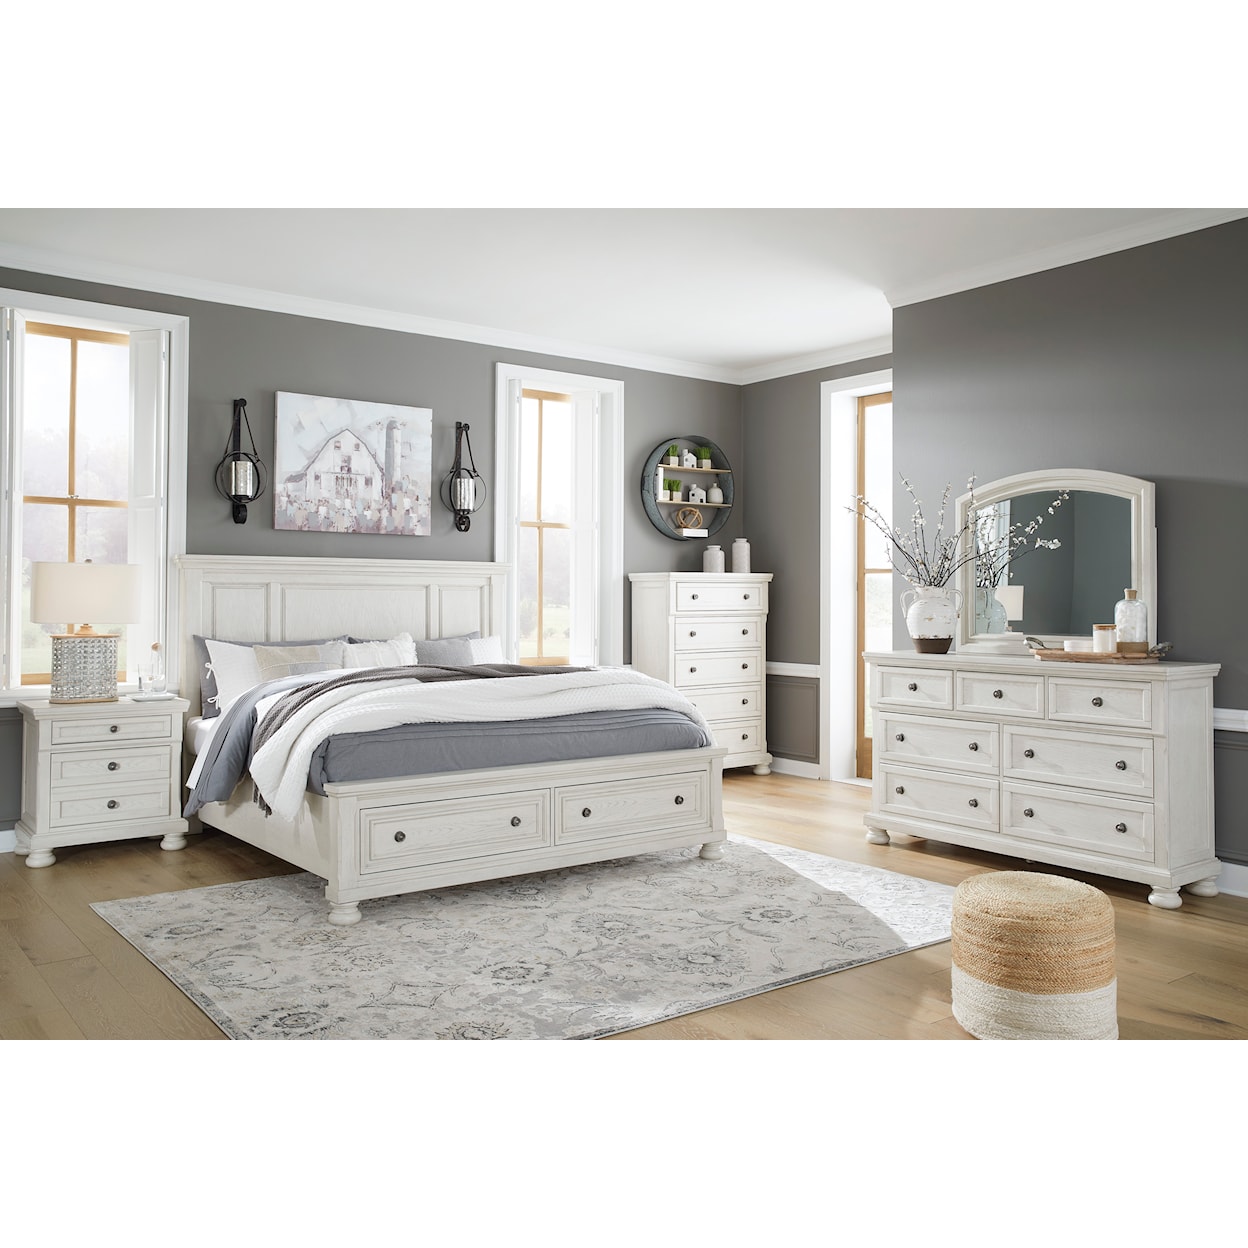 Signature Robbinsdale King Panel Bed with Storage